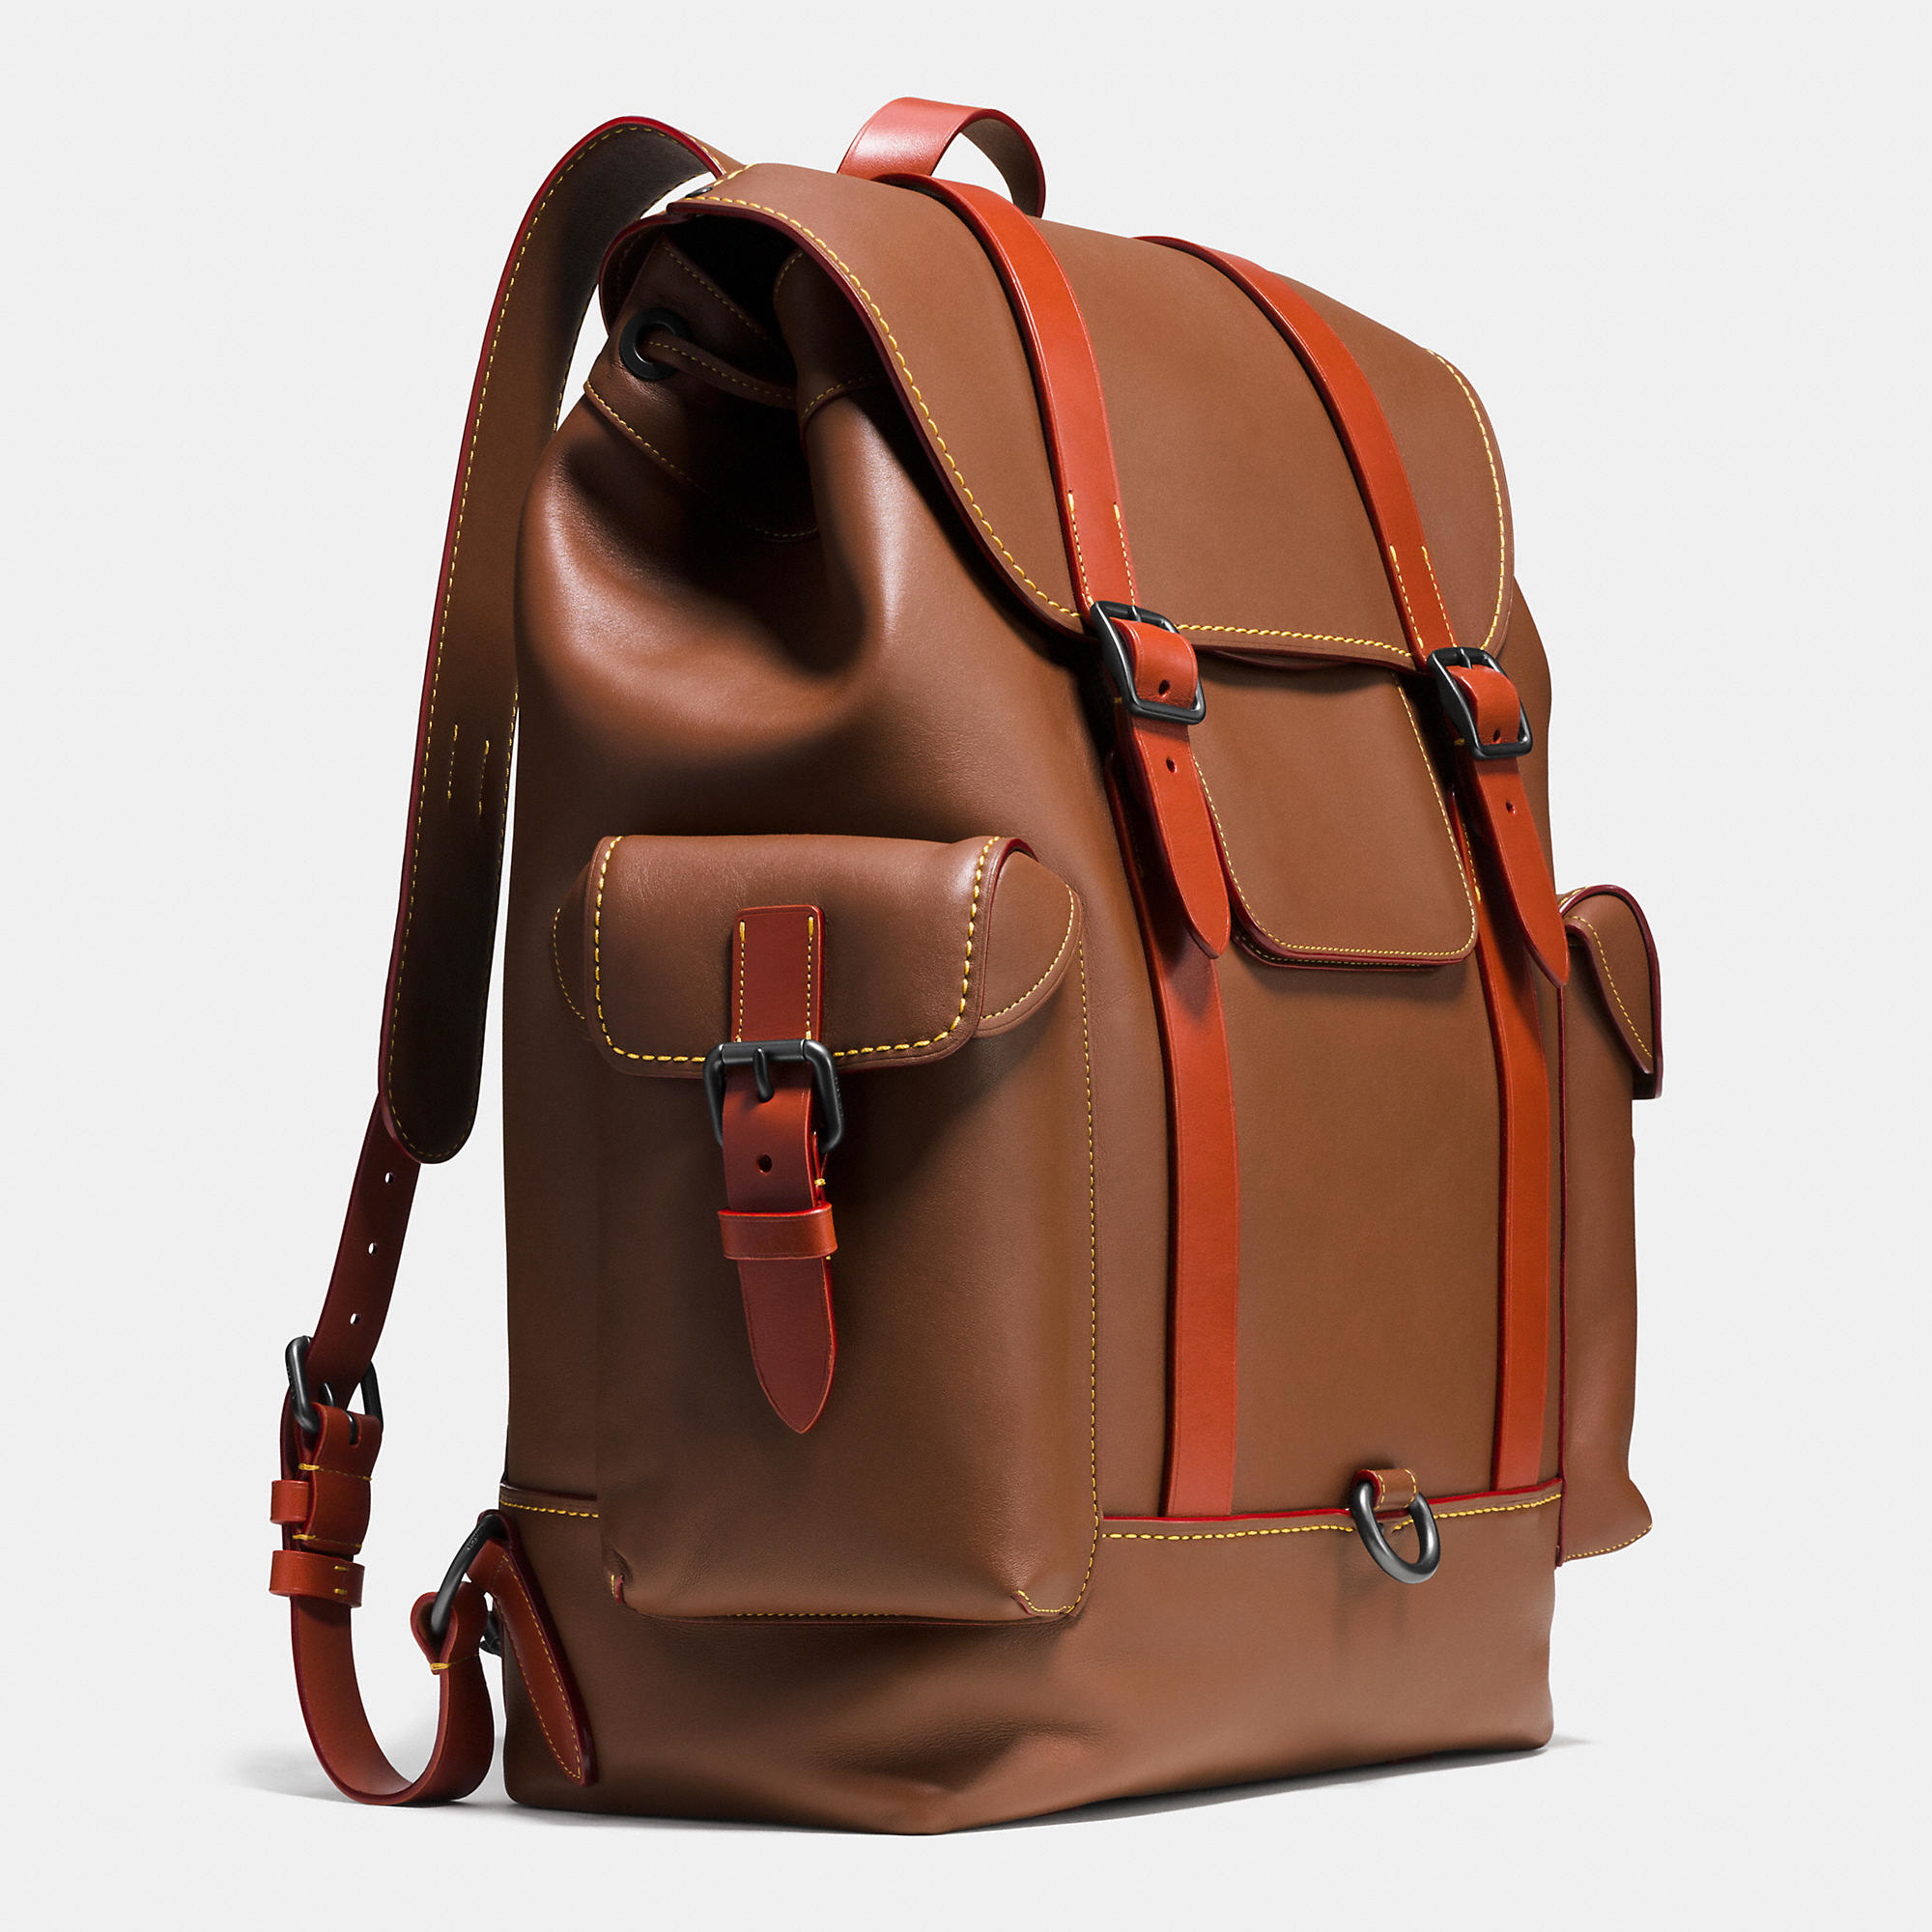 COACH Gotham Backpack In Glovetanned Leather for Men - Lyst